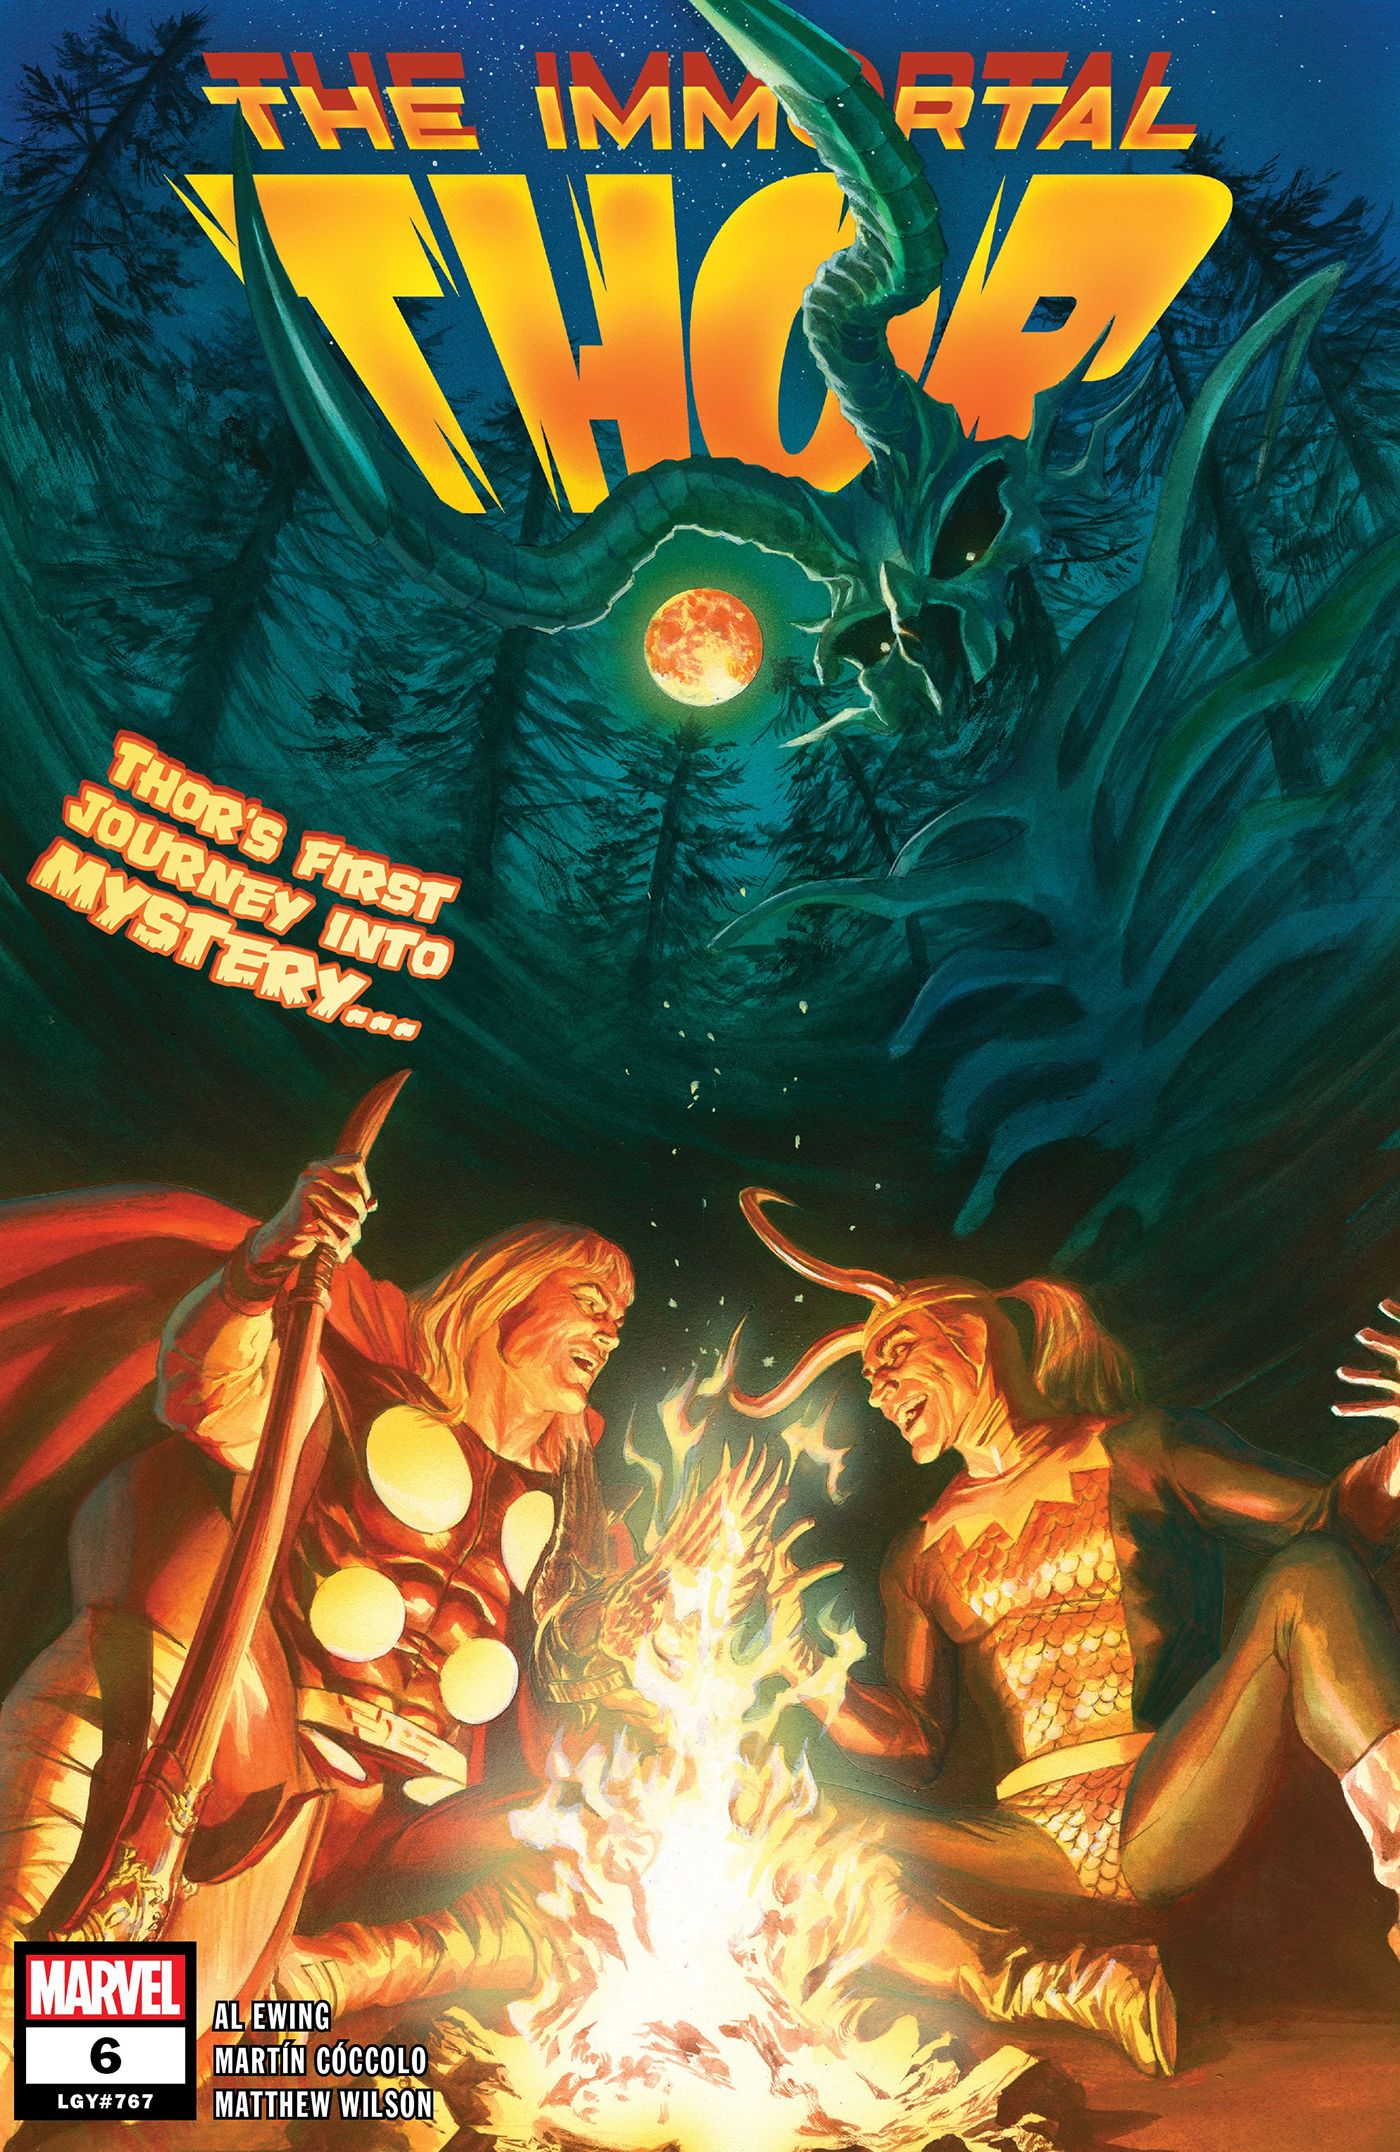 The Immortal Thor #6 Cover by Alex Ross - Thor and Loki sit around a campfire